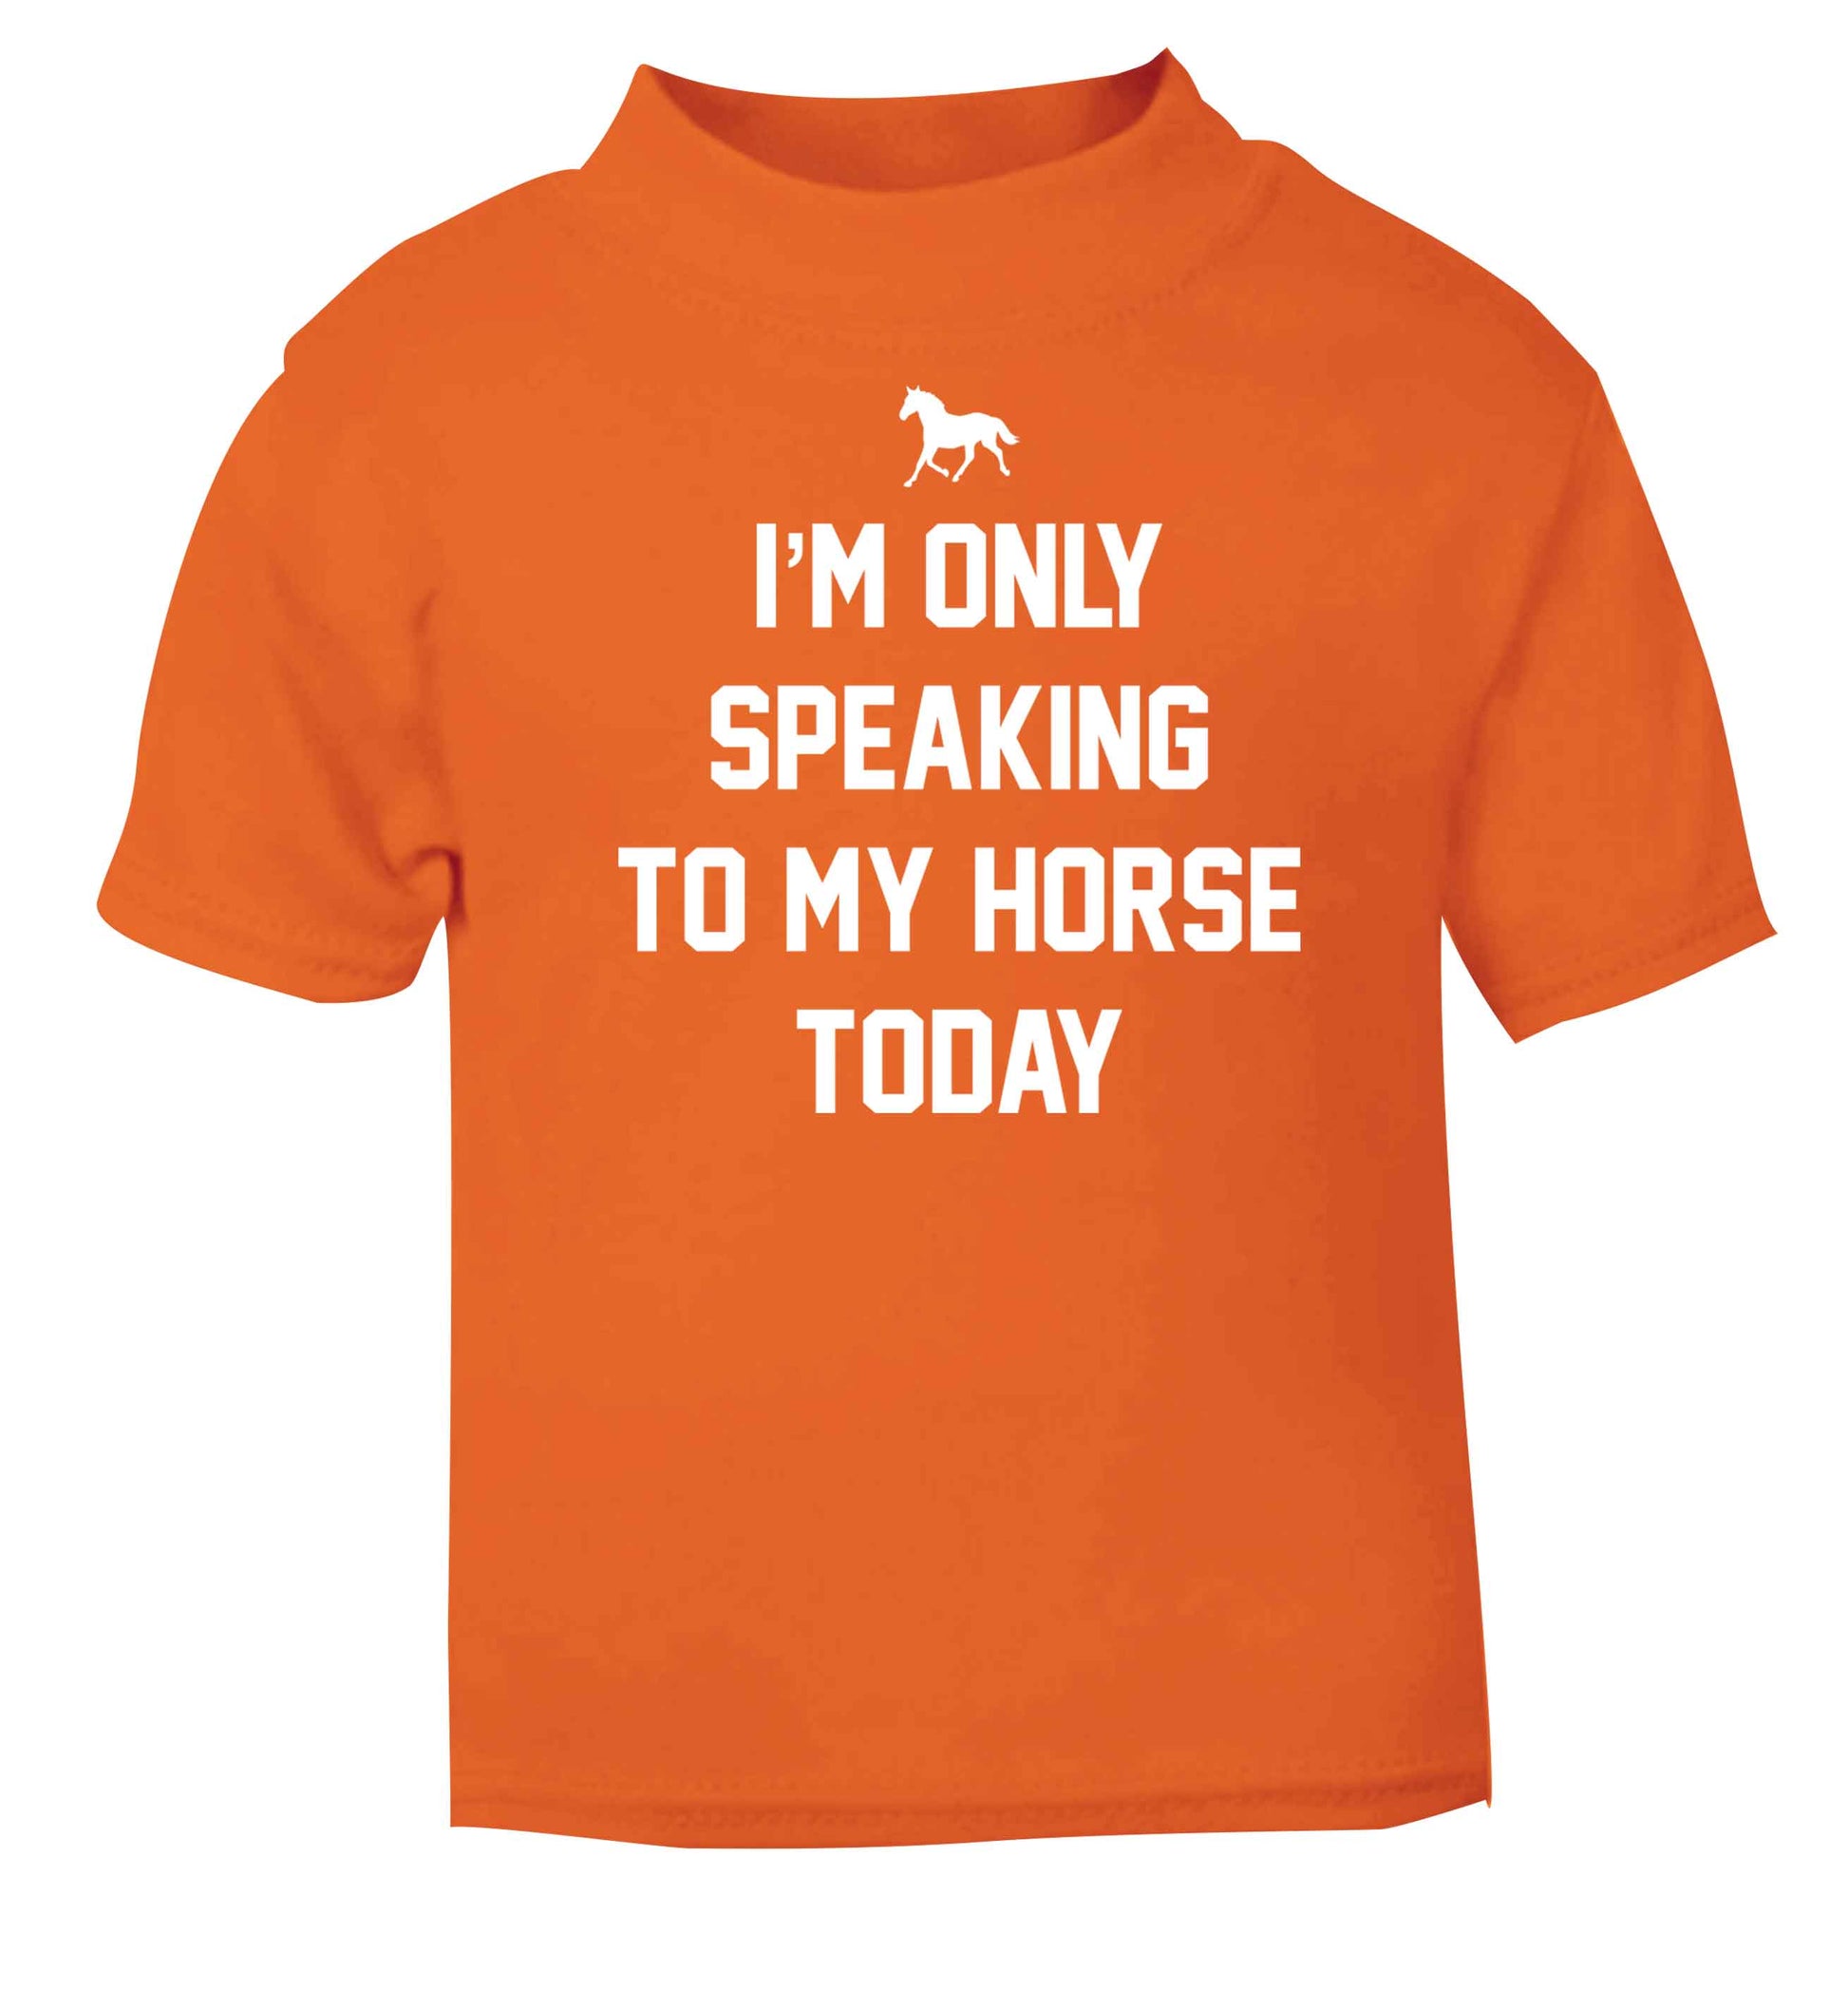 I'm only speaking to my horse today orange baby toddler Tshirt 2 Years